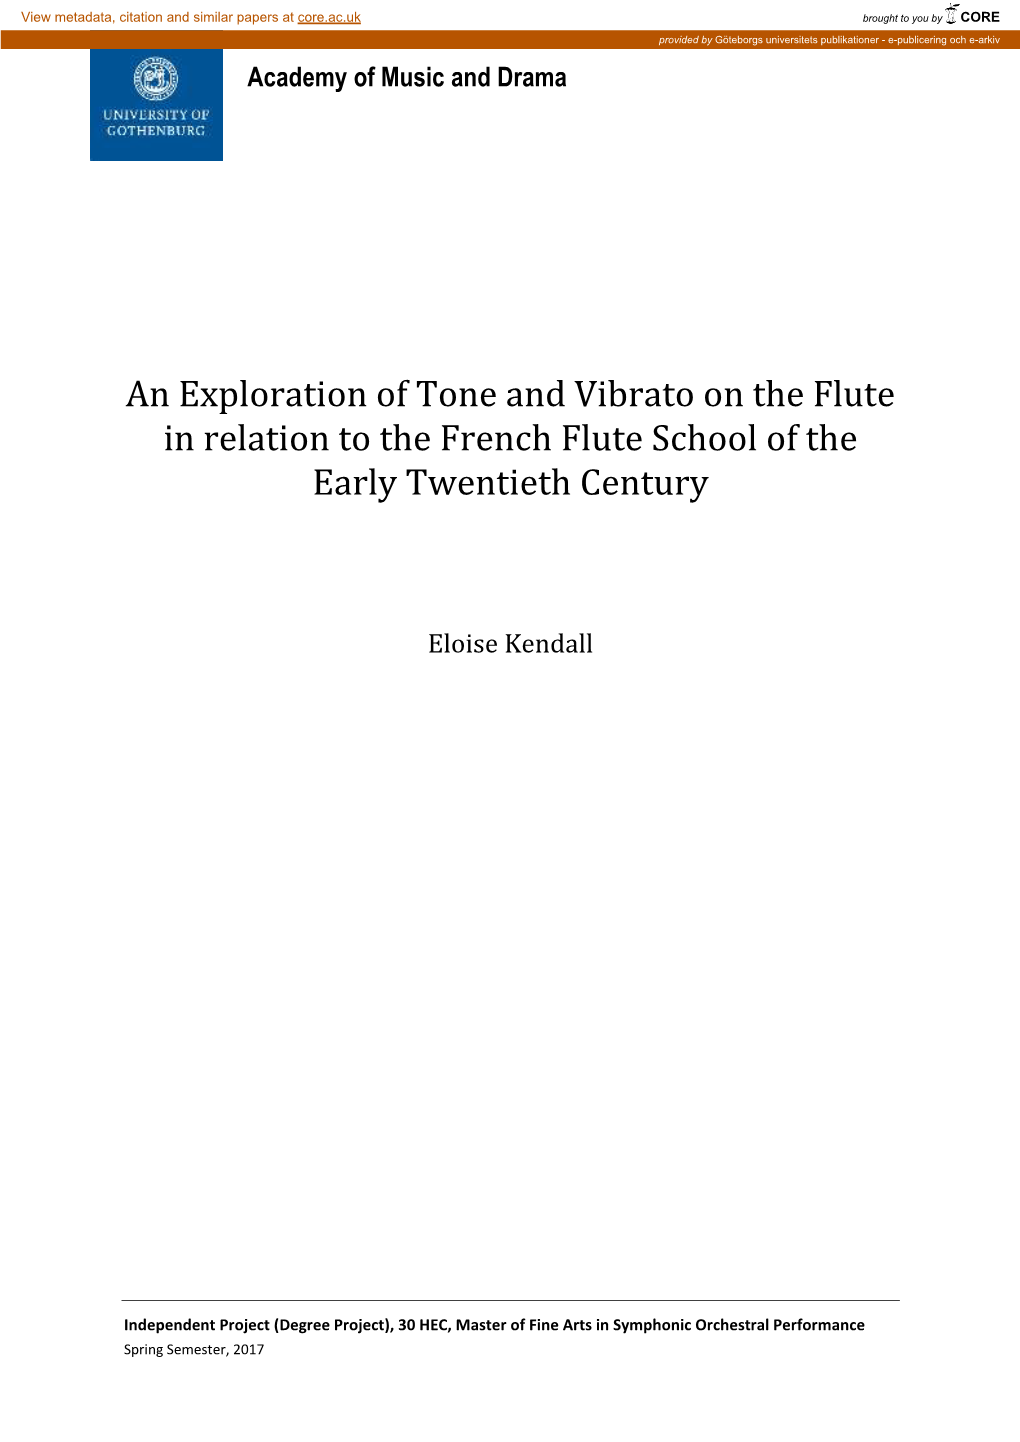 An Exploration of Tone and Vibrato on the Flute in Relation to the French Flute School of the Early Twentieth Century